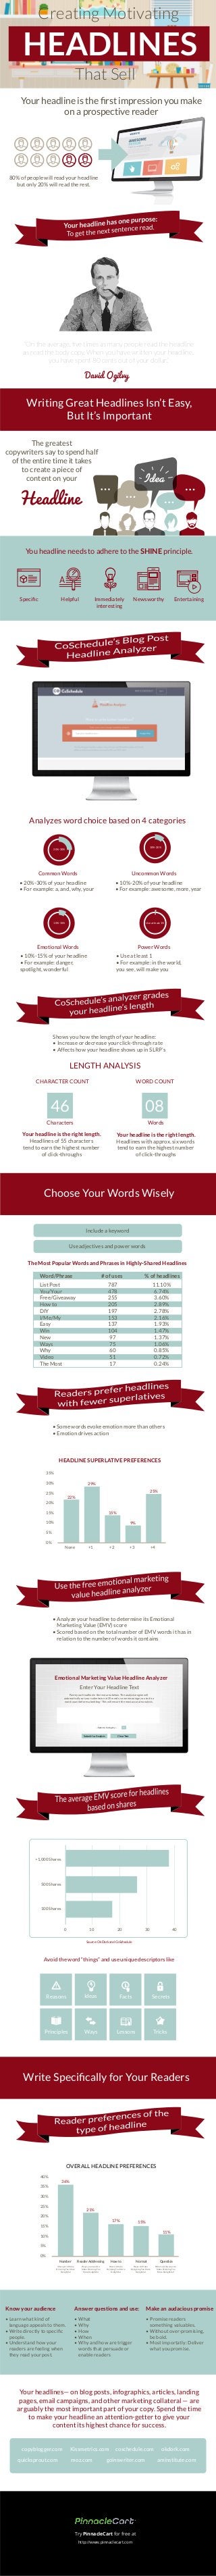 Analyzes word choice based on 4 categories
• 20%-30% of your headline
• For example: a, and, why, your
Common Words
• 10%-20% of your headline
• For example: awesome, more, year
Uncommon Words
• 10%-15% of your headline
• For example: danger,
spotlight, wonderful
Emotional Words
• Use at least 1
• For example: in the world,
you see, will make you
Power Words
Shows you how the length of your headline:
• Increase or decrease your click-through rate
• Affects how your headline shows up in SLRP’s
LENGTH ANALYSIS
CHARACTER COUNT
Characters
Your headline is the right length.
Headlines of 55 characters
tend to earn the highest number
of click-throughs
WORD COUNT
Words
Your headline is the right length.
Headlines with approx. six words
tend to earn the highest number
of click-throughs
The Most Popular Words and Phrases in Highly-Shared Headlines
Word/Phrase
List Post
You/Your
Free/Giveaway
How to
DIY
I/Me/My
Easy
Win
New
Ways
Why
Video
The Most
# of uses
787
478
255
205
197
153
137
104
97
75
60
51
17
% of headlines
11.10%
6.74%
3.60%
2.89%
2.78%
2.16%
1.93%
1.47%
1.37%
1.06%
0.85%
0.72%
0.24%
• Some words evoke emotion more than others
• Emotion drives action
HEADLINE SUPERLATIVE PREFERENCES
35%
30%
25%
20%
15%
10%
5%
0%
22%
29%
15%
9%
25%
None +1 +2 +3 +4
Source: OkDork and CoSchedule
Avoid the word “things” and use unique descriptors like
OVERALL HEADLINE PREFERENCES
Number Reader Addressing How to Normal Question
>1,000 Shares
500 Shares
100 Shares
0 10 20 30 40
40%
35%
30%
25%
20%
15%
10%
5%
0%
36%
21%
17% 15%
11%
30 ways to Make
Drinking Tea More
Delightful
Ways you need to
Make Drinking Tea
More Delightful
How to Make
Drinking Tea More
Delightful
Ways to Make
Dringking Tea More
Delightful
What are the ways to
Make Drinking Tea
More Delightful?
Your headlines— on blog posts, infographics, articles, landing
pages, email campaigns, and other marketing collateral — are
arguably the most important part of your copy. Spend the time
to make your headline an attention-getter to give your
content its highest chance for success.
copyblogger.com Kissmetrics.com coschedule.com okdork.com
quicksprout.com moz.com goinswriter.com aminstitute.com
Try PinnacleCart for free at
http://www.pinnaclecart.com
Choose Your Words Wisely
Include a keyword
Use adjectives and power words
Emotional Marketing Value Headline Analyzer
Enter Your Headline Text
Paste your headline in the text area below. The analysis engine will
automatically cut your submission at 20 words, so we encourage you to do a
word count before submitting! This will ensure the most accurate analysis.
--Select a Category--
Submit for Analysis Clear Text
Write Speciﬁcally for Your Readers
Reasons
Principles
Ideas
Ways
Facts
Lessons
Secrets
Tricks
Know your audience
• Learn what kind of
language appeals to them.
• Write directly to speciﬁc
people.
• Understand how your
readers are feeling when
they read your post.
Answer questions and use:
• What
• Why
• How
• When
• Why and how are trigger
words that persuade or
enable readers
Make an audacious promise
• Promise readers
something valuables.
• Without over-promising,
be bold.
• Most importatly: Deliver
what you promise.
Writing Great Headlines Isn’t Easy,
But It’s Important
Speciﬁc Helpful Immediately
interesting
Newsworthy Entertaining
You headline needs to adhere to the SHINE principle.
Headline
The greatest
copywriters say to spend half
of the entire time it takes
to create a piece of
content on your
20%-30%
10%-20%
10%-15% Use at least 1%
0846
Writing Great Headlines Isn’t Easy,
But It’s Important
Your headline is the ﬁrst impression you make
on a prospective reader
80% of people will read your headline
but only 20% will read the rest.
“On the average, ﬁve times as many people read the headline
as read the body copy. When you have written your headline,
you have spent 80 cents out of your dollar.”
David Ogilvy
• Analyze your headline to determine its Emotional
Marketing Value (EMV) score
• Scored based on the total number of EMV words it has in
relation to the number of words it contains
Creating Motivating
HEADLINES
That Sell
 